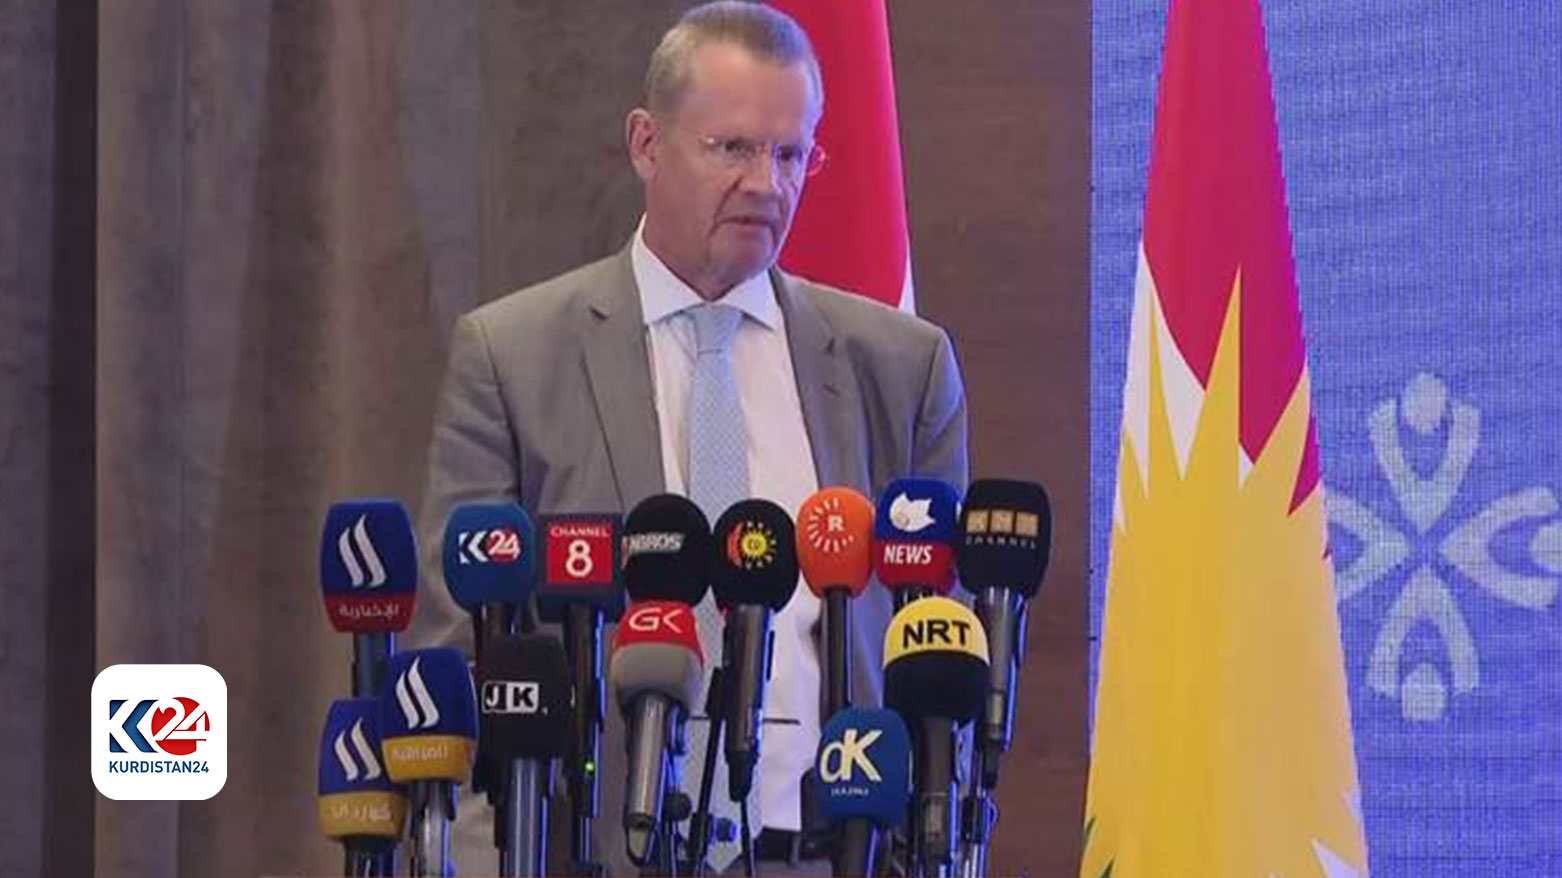 Germany reaffirms commitment to Yezidi refugees at Lalish Conference